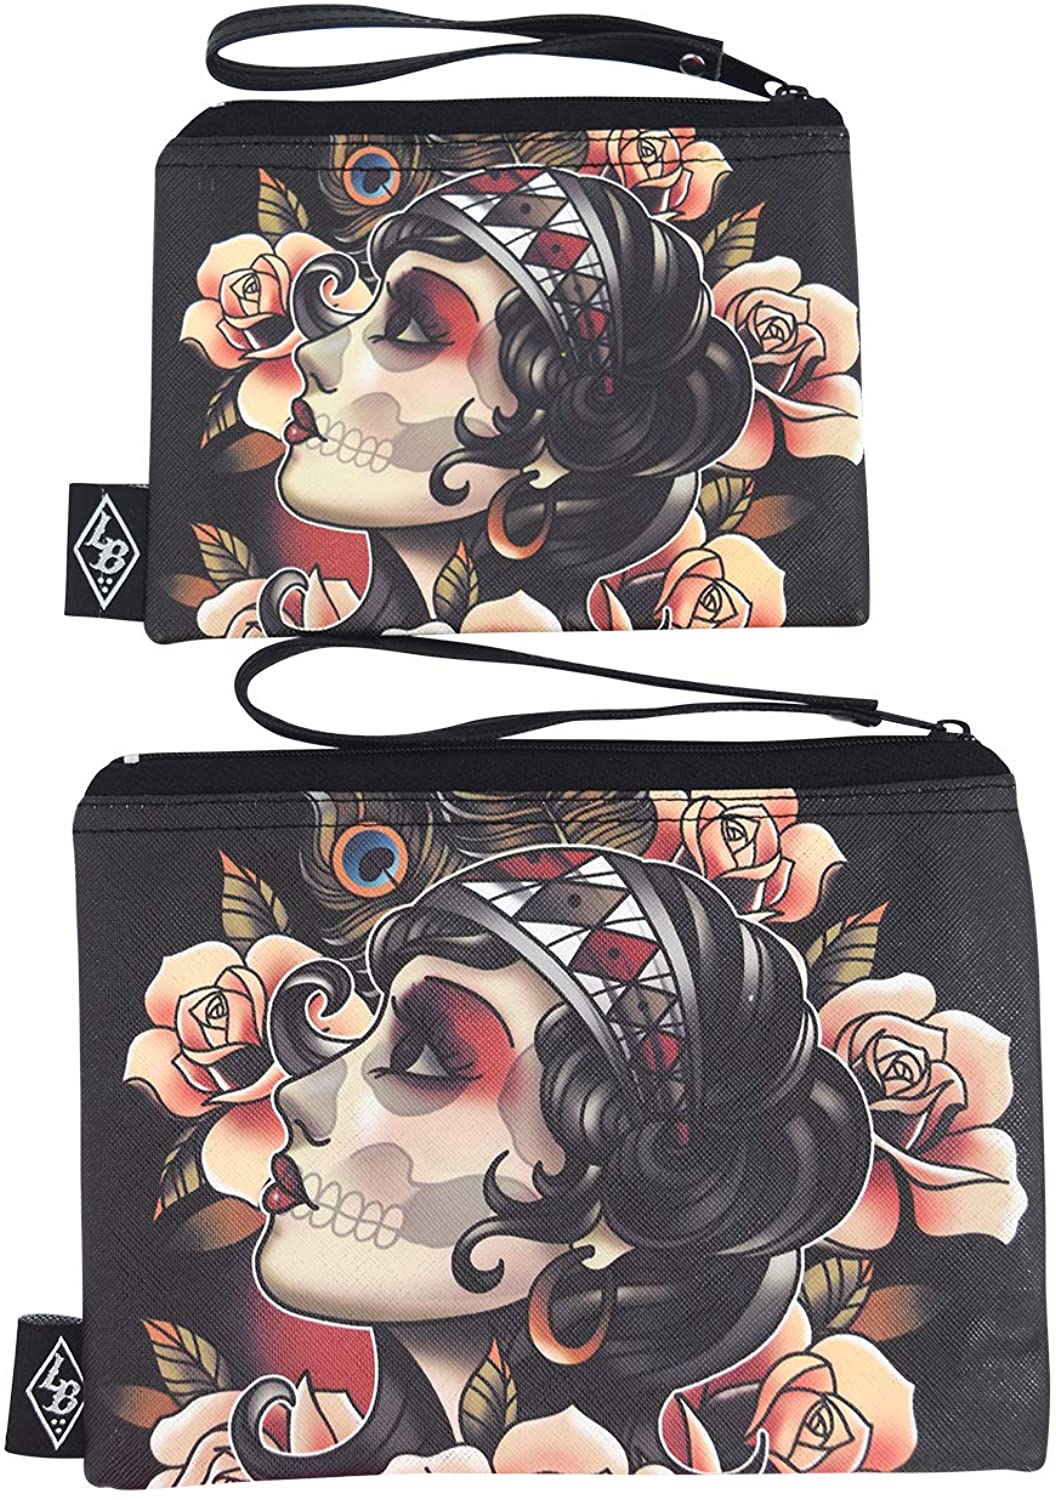 Liquorbrand Gypsy Rose Sugar Skull Tattoo Art wristlet pouch bag and Coin Purse